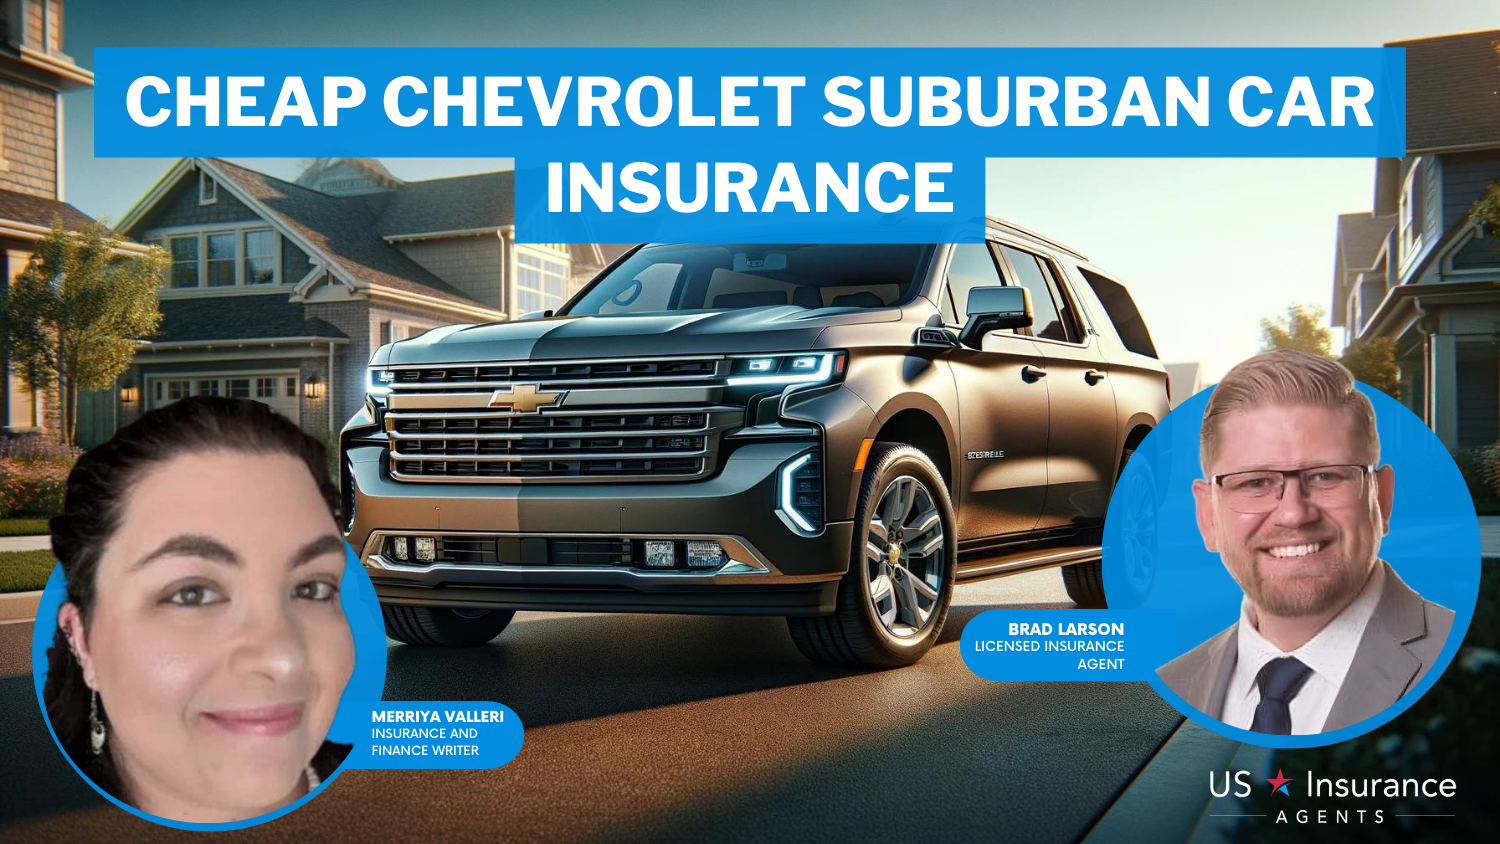 Cheap Chevrolet Suburban Car Insurance: Erie, Auto Owners, and State Farm